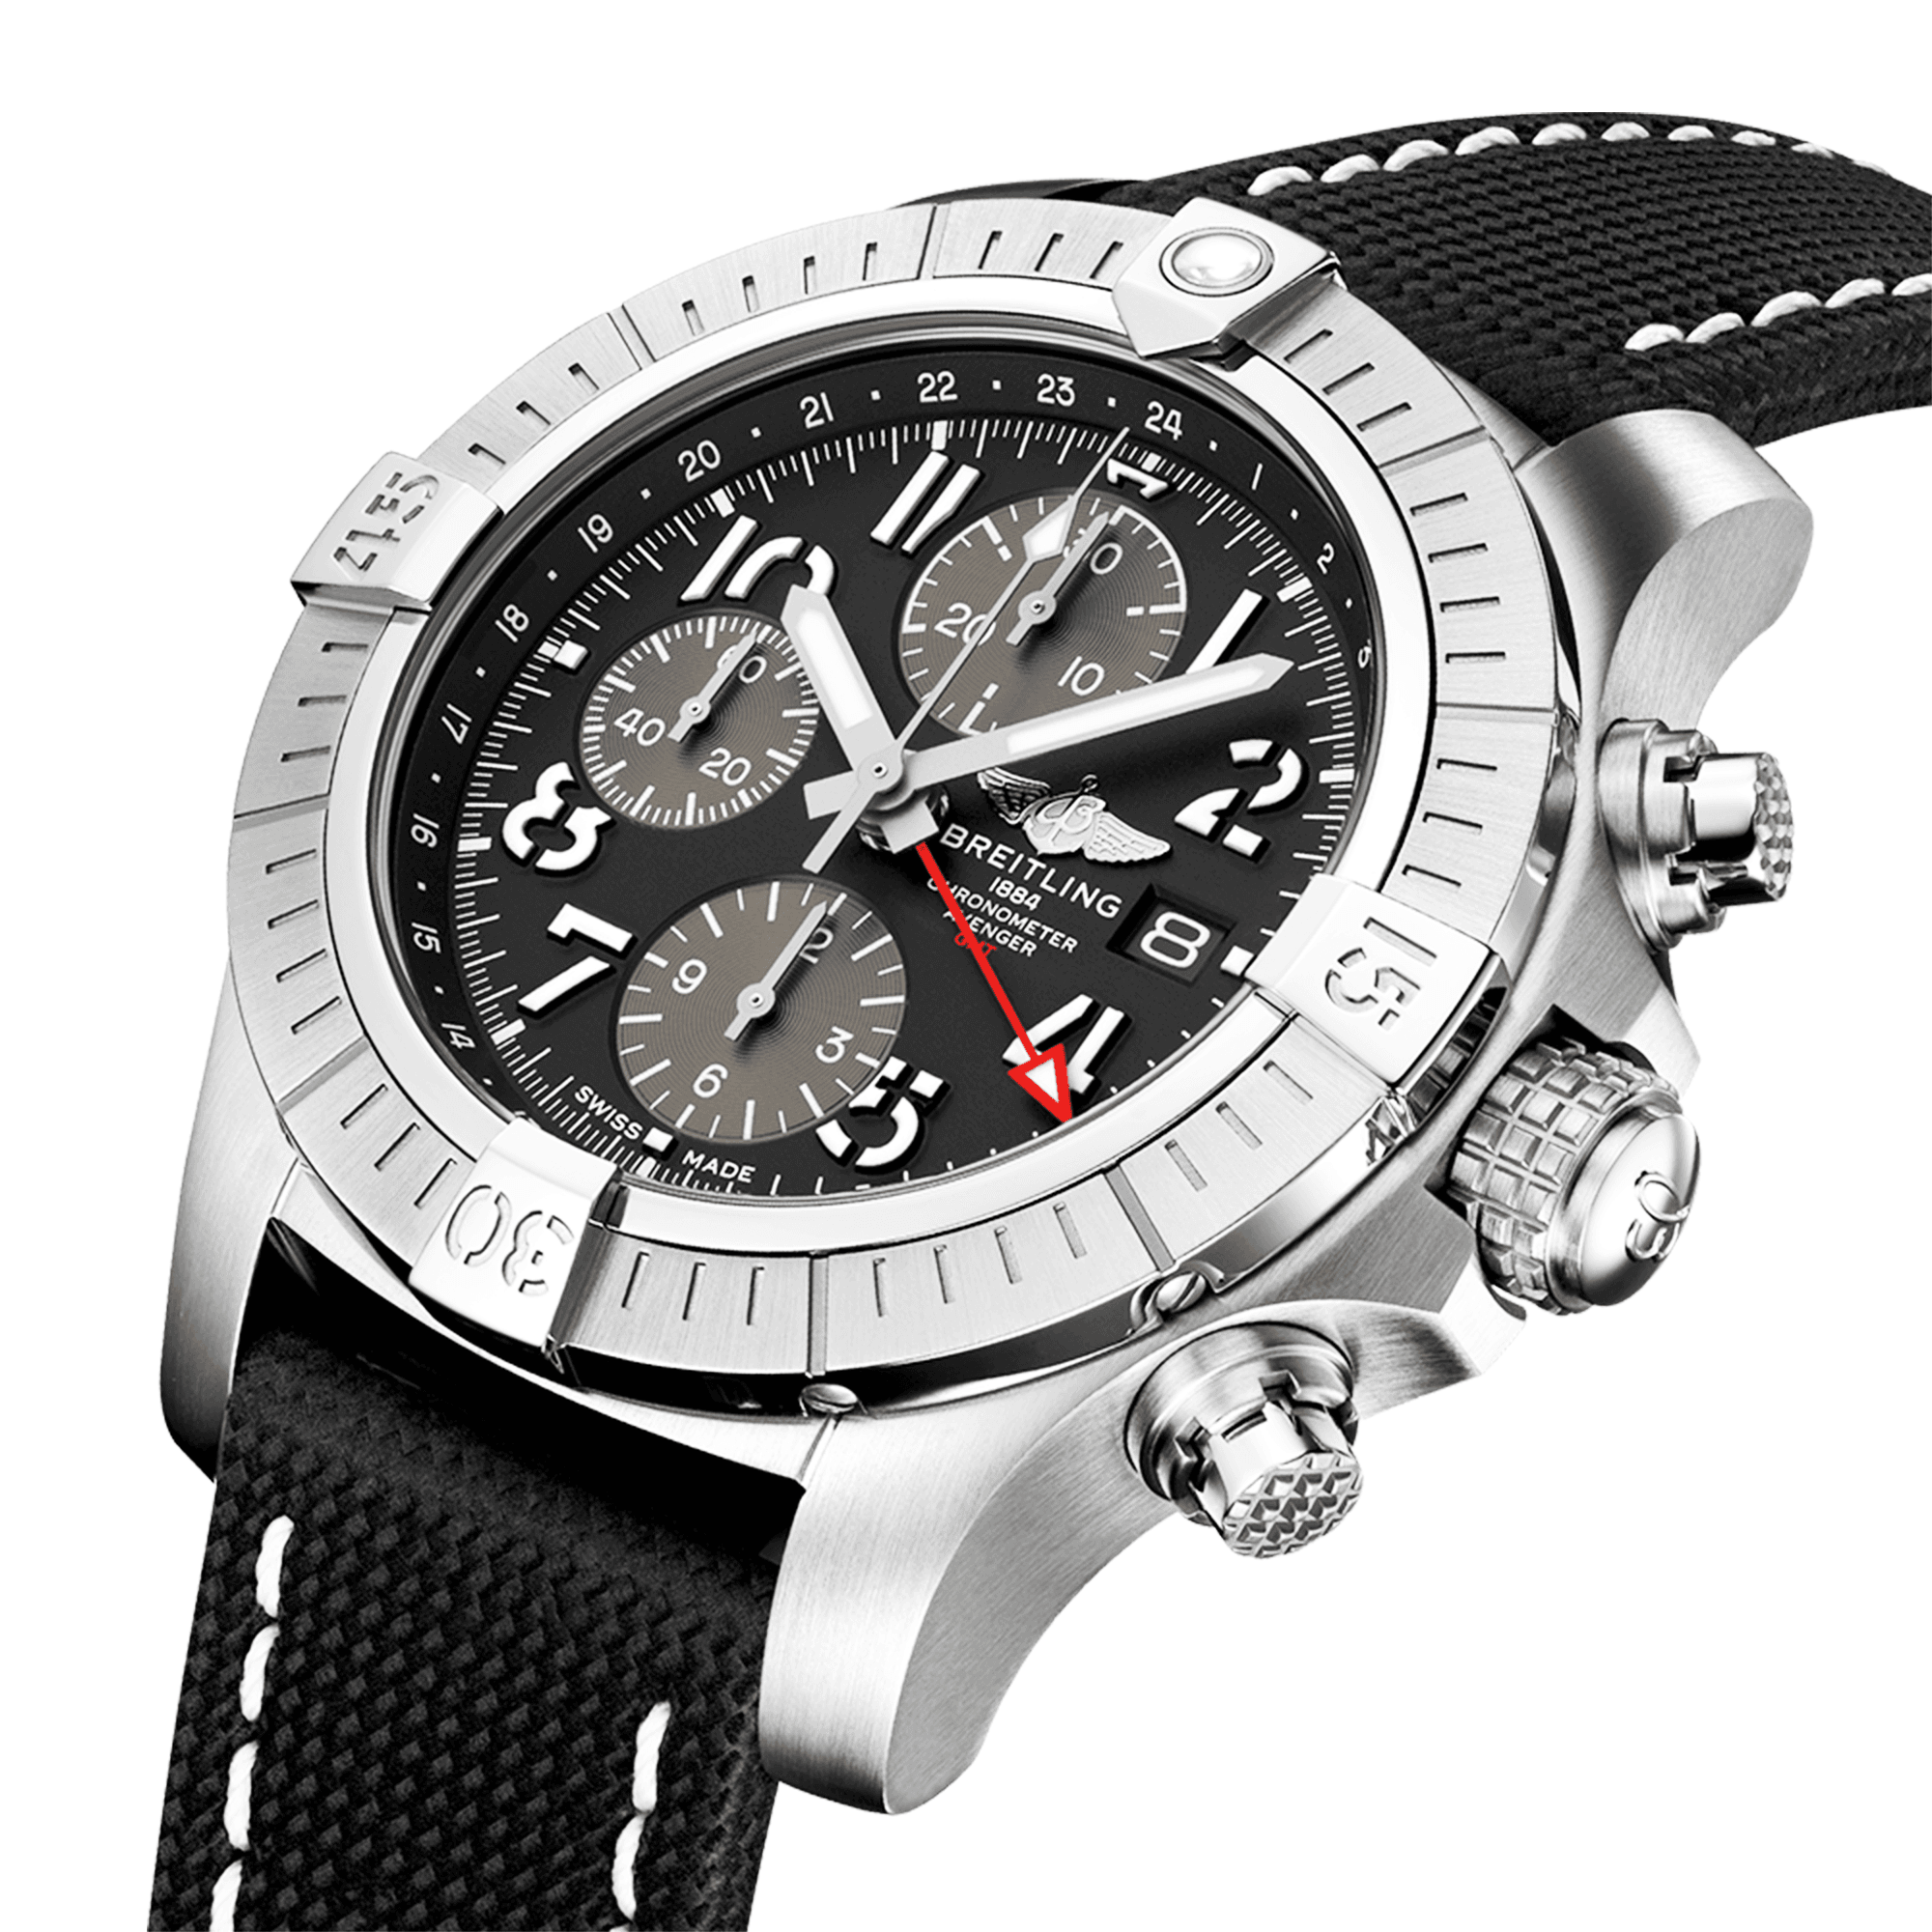 Avenger GMT 45mm Black/Grey Dial Automatic Chronograph Strap Watch